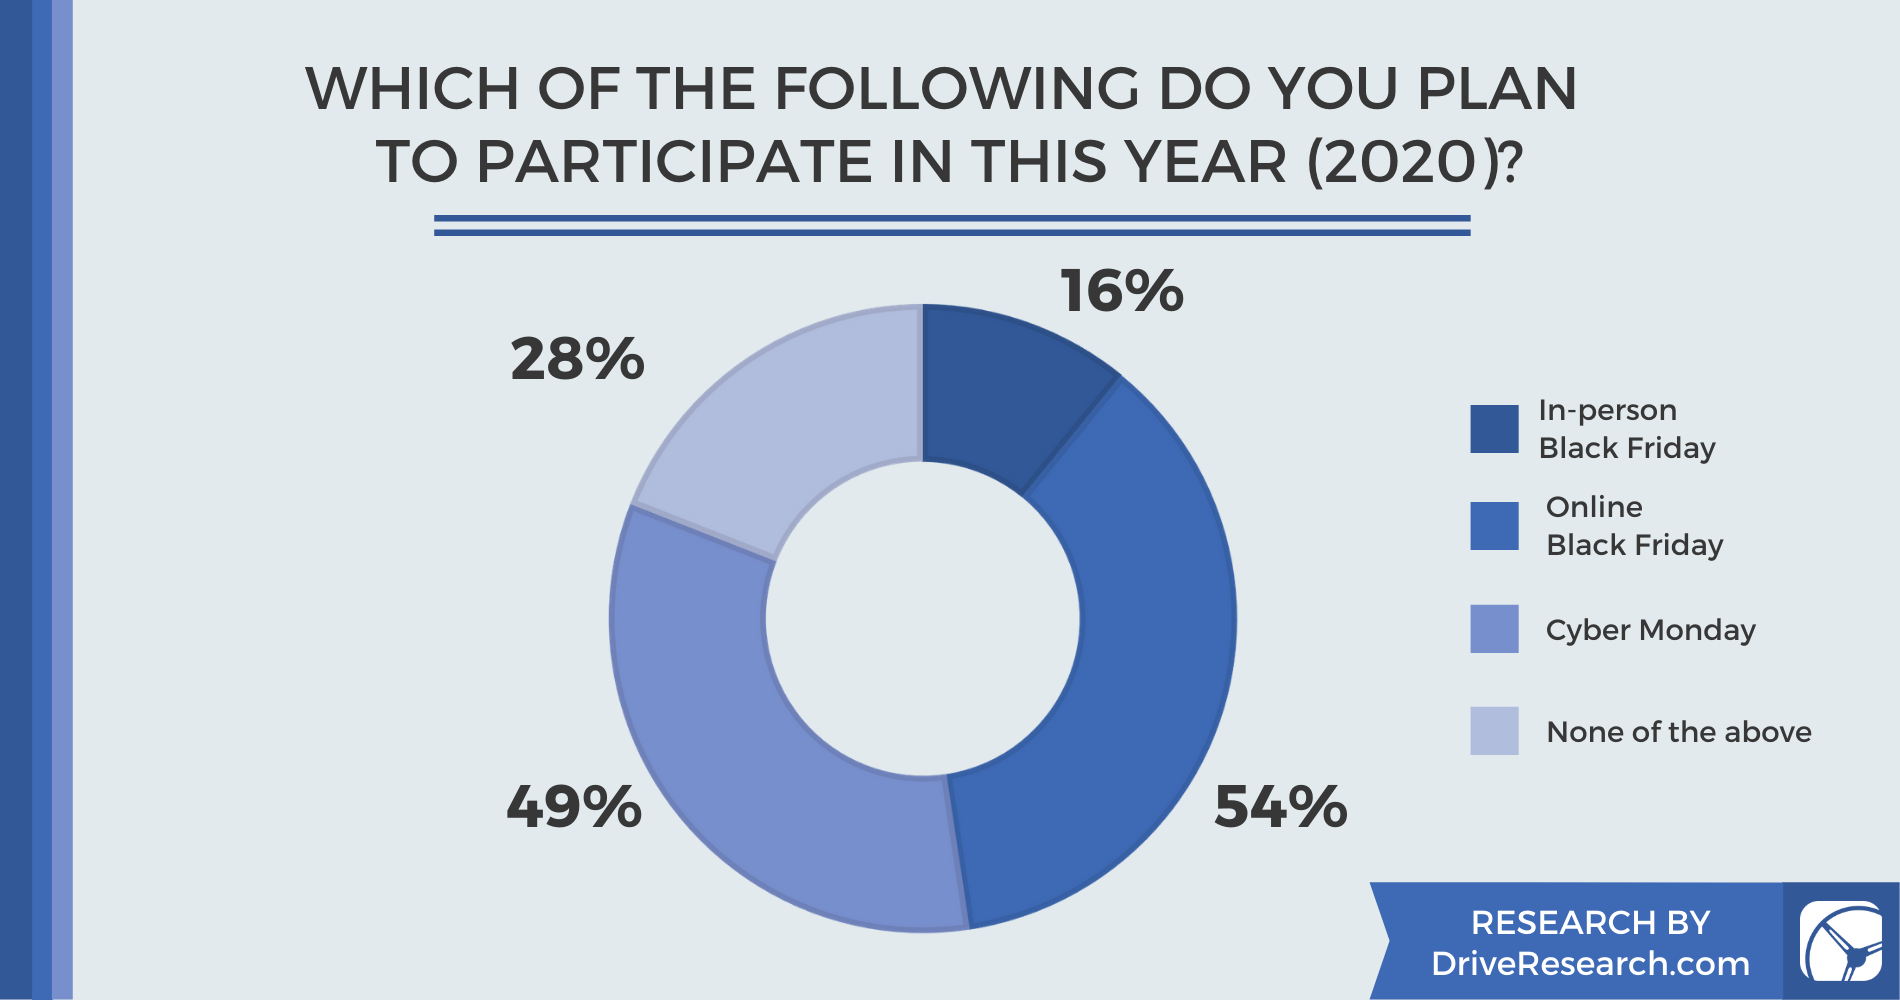 WHICH OF THE FOLLOWING DO YOU PLAN  TO PARTICIPATE IN THIS YEAR (2020)?